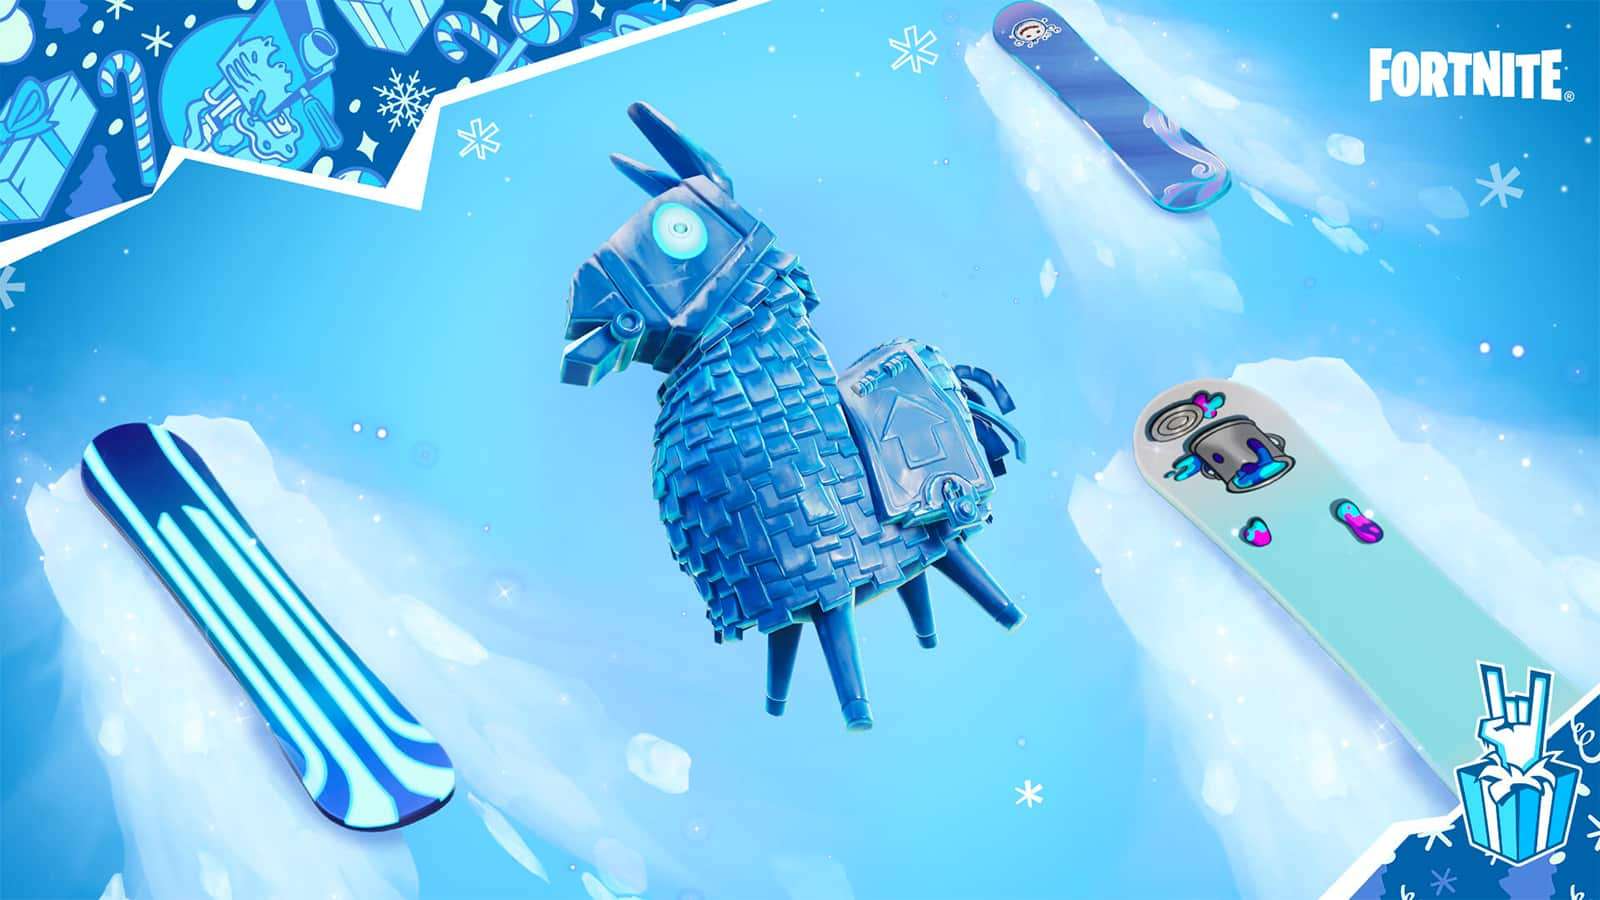 The rewards for completing the Fortnite Winterfest 2021 challenges